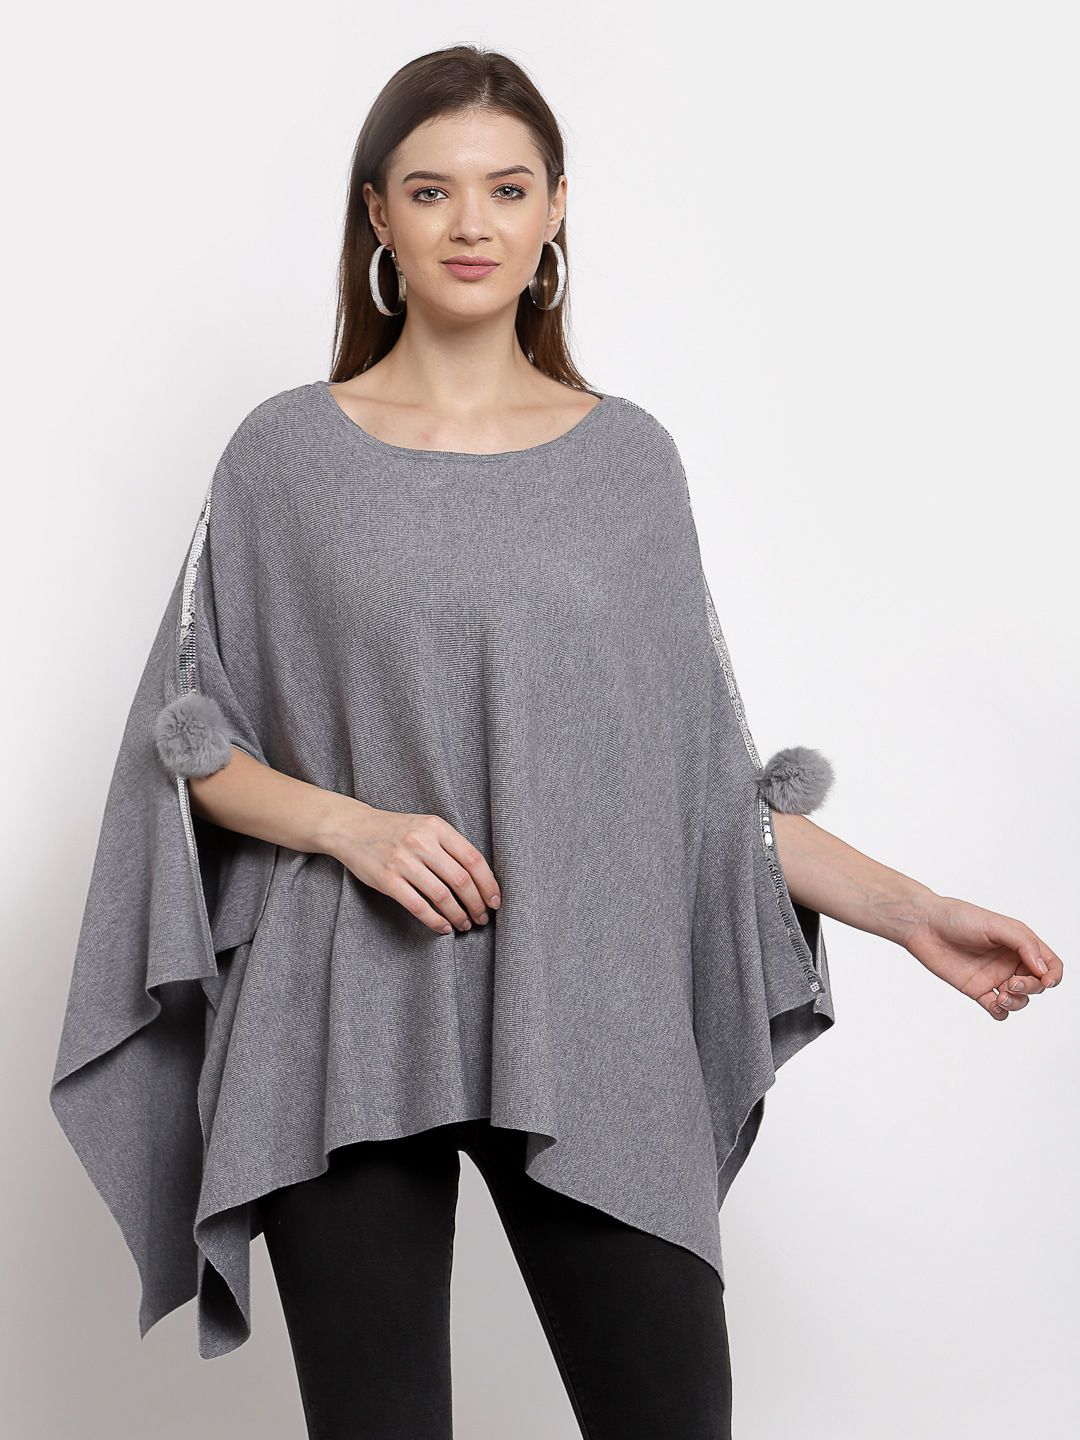 Mafadeny Women Grey & Silver-Toned Poncho with Embellished Detail Price in India